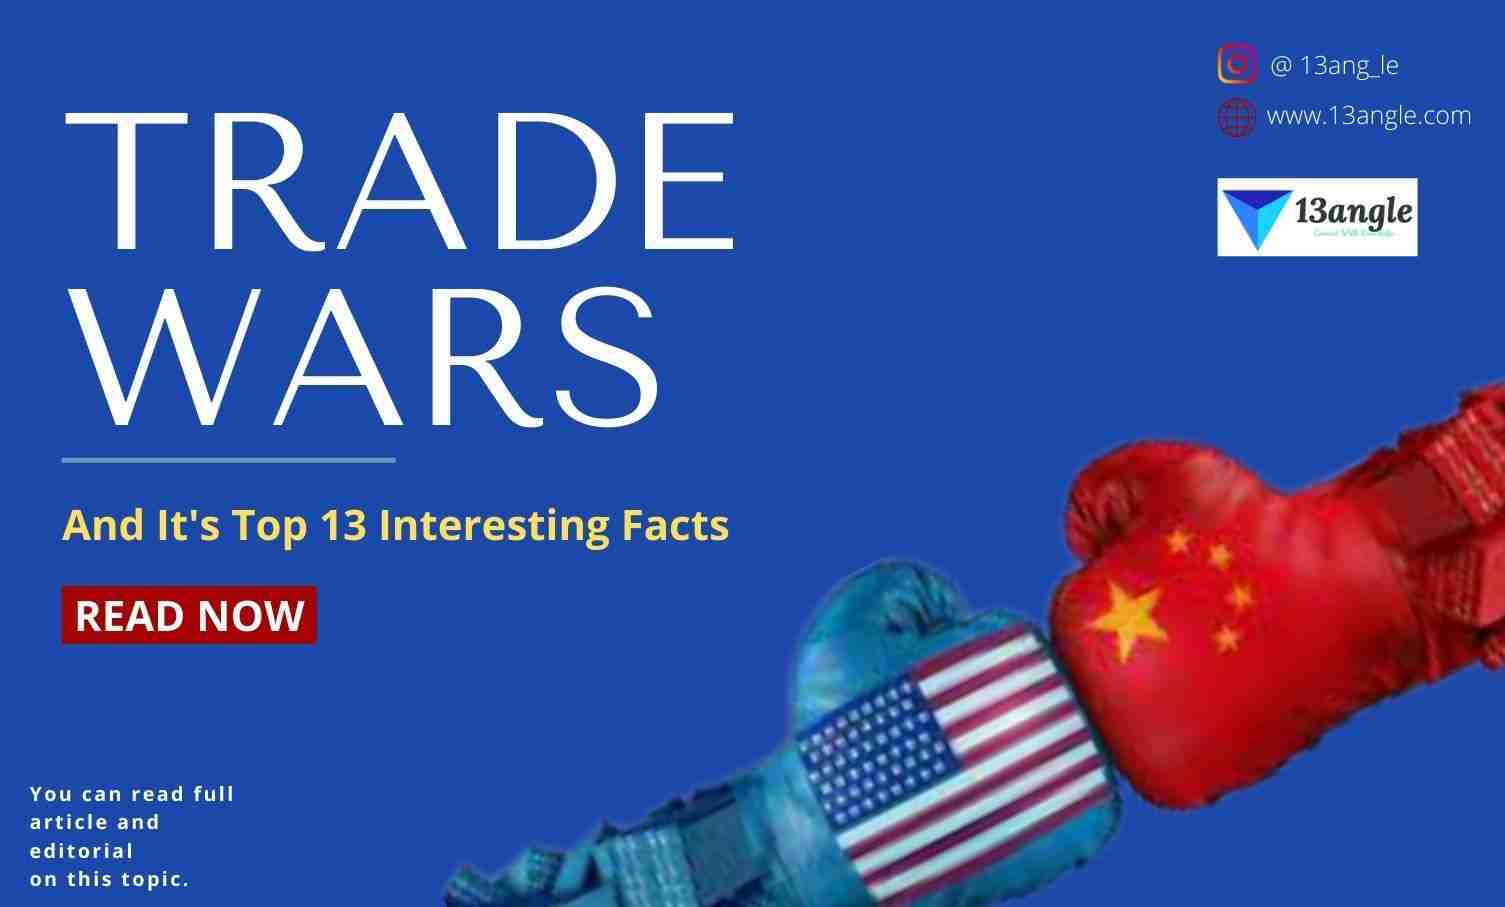 Trade Wars And It's Top 13 Interesting Facts- 13angle.com